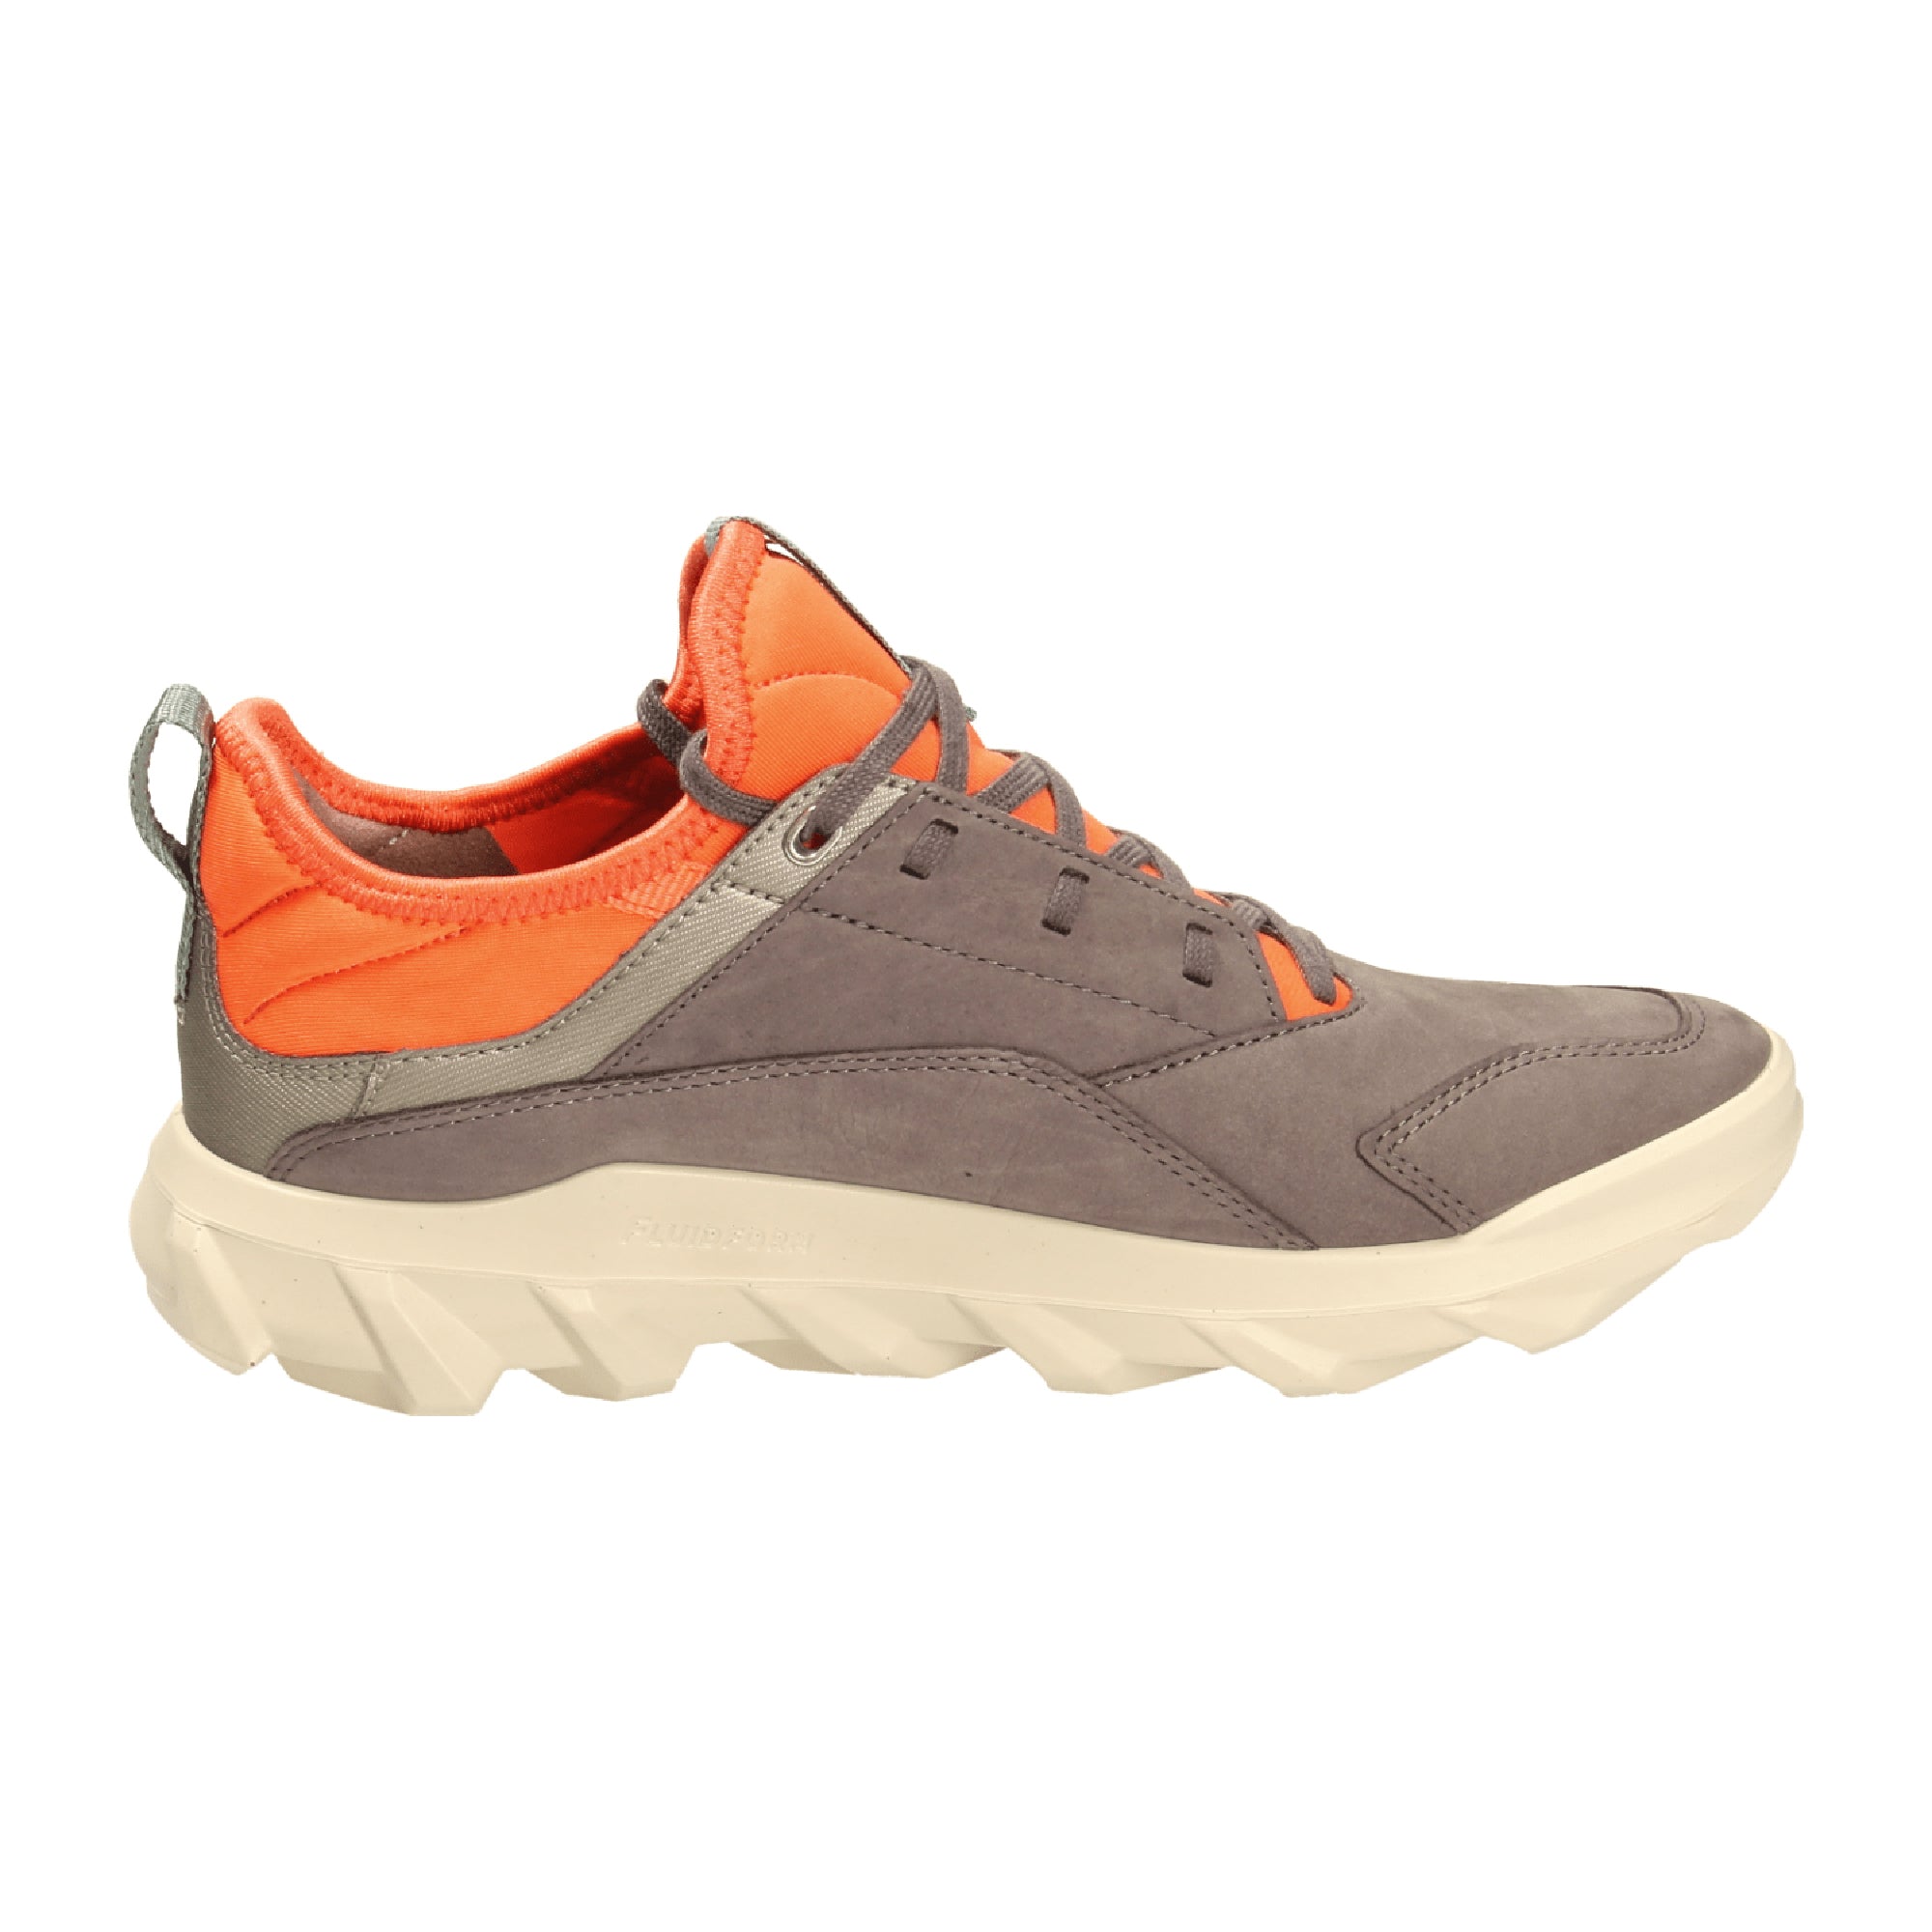 Ecco MX Women's Sneakers 82018 - Stylish Grey & Orange Casual Shoes for Everyday Comfort